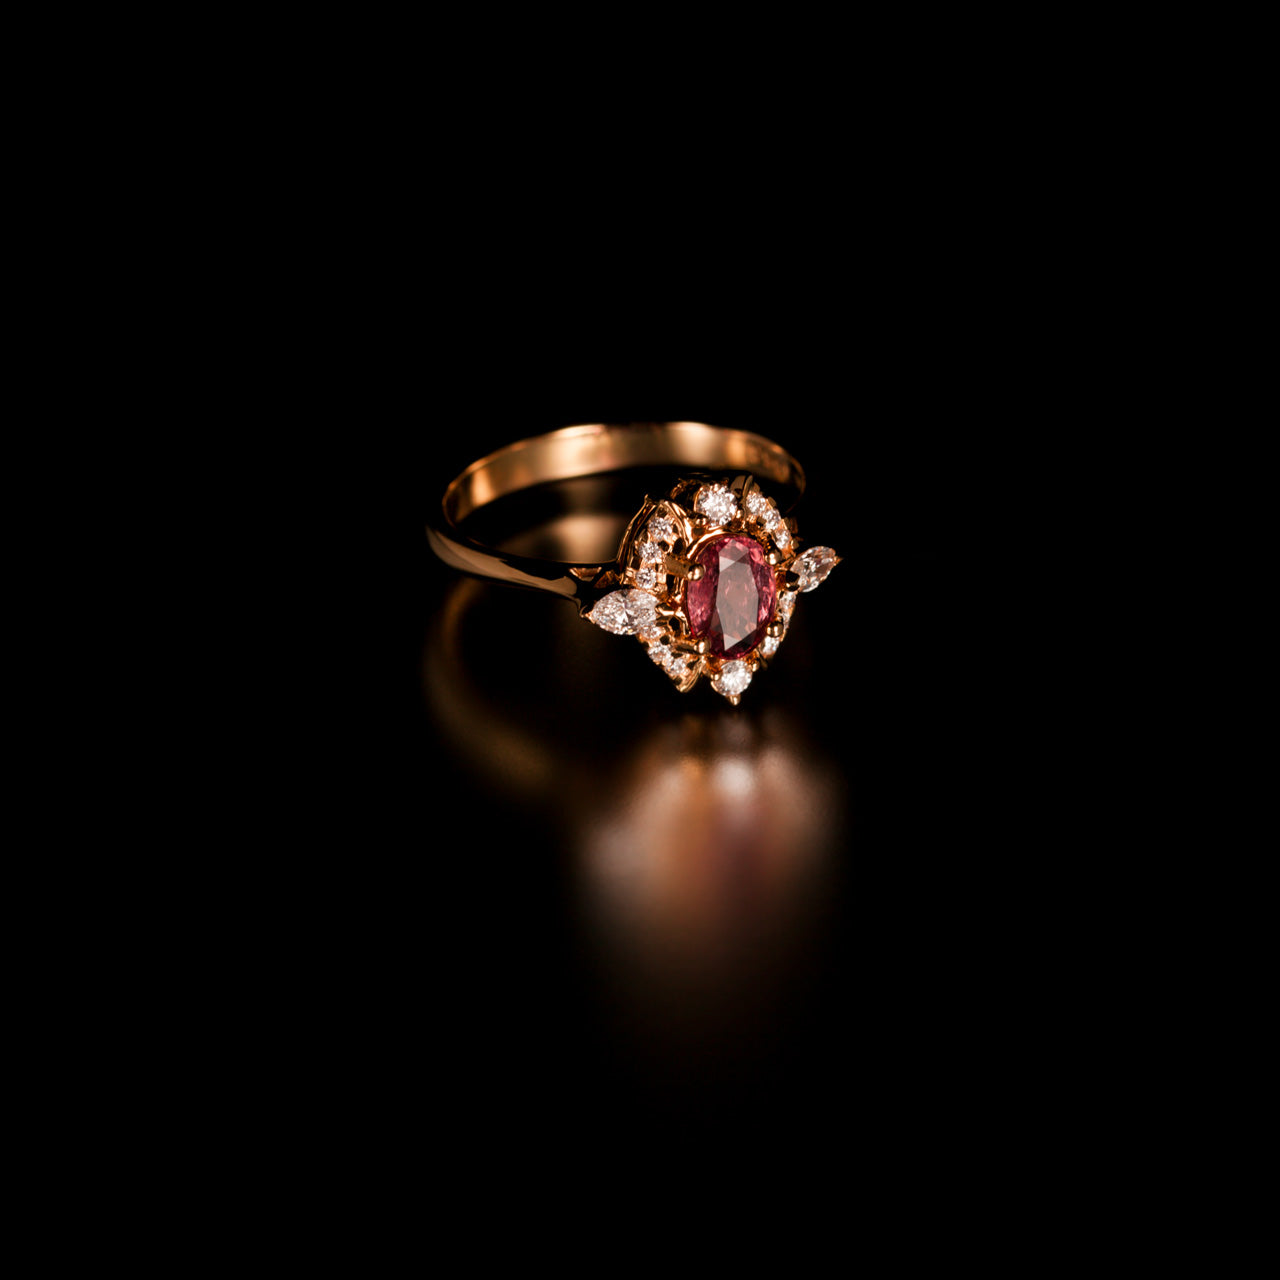 0.76ct Natural Unheated Pink Sapphire 18k Yellow Gold Ring